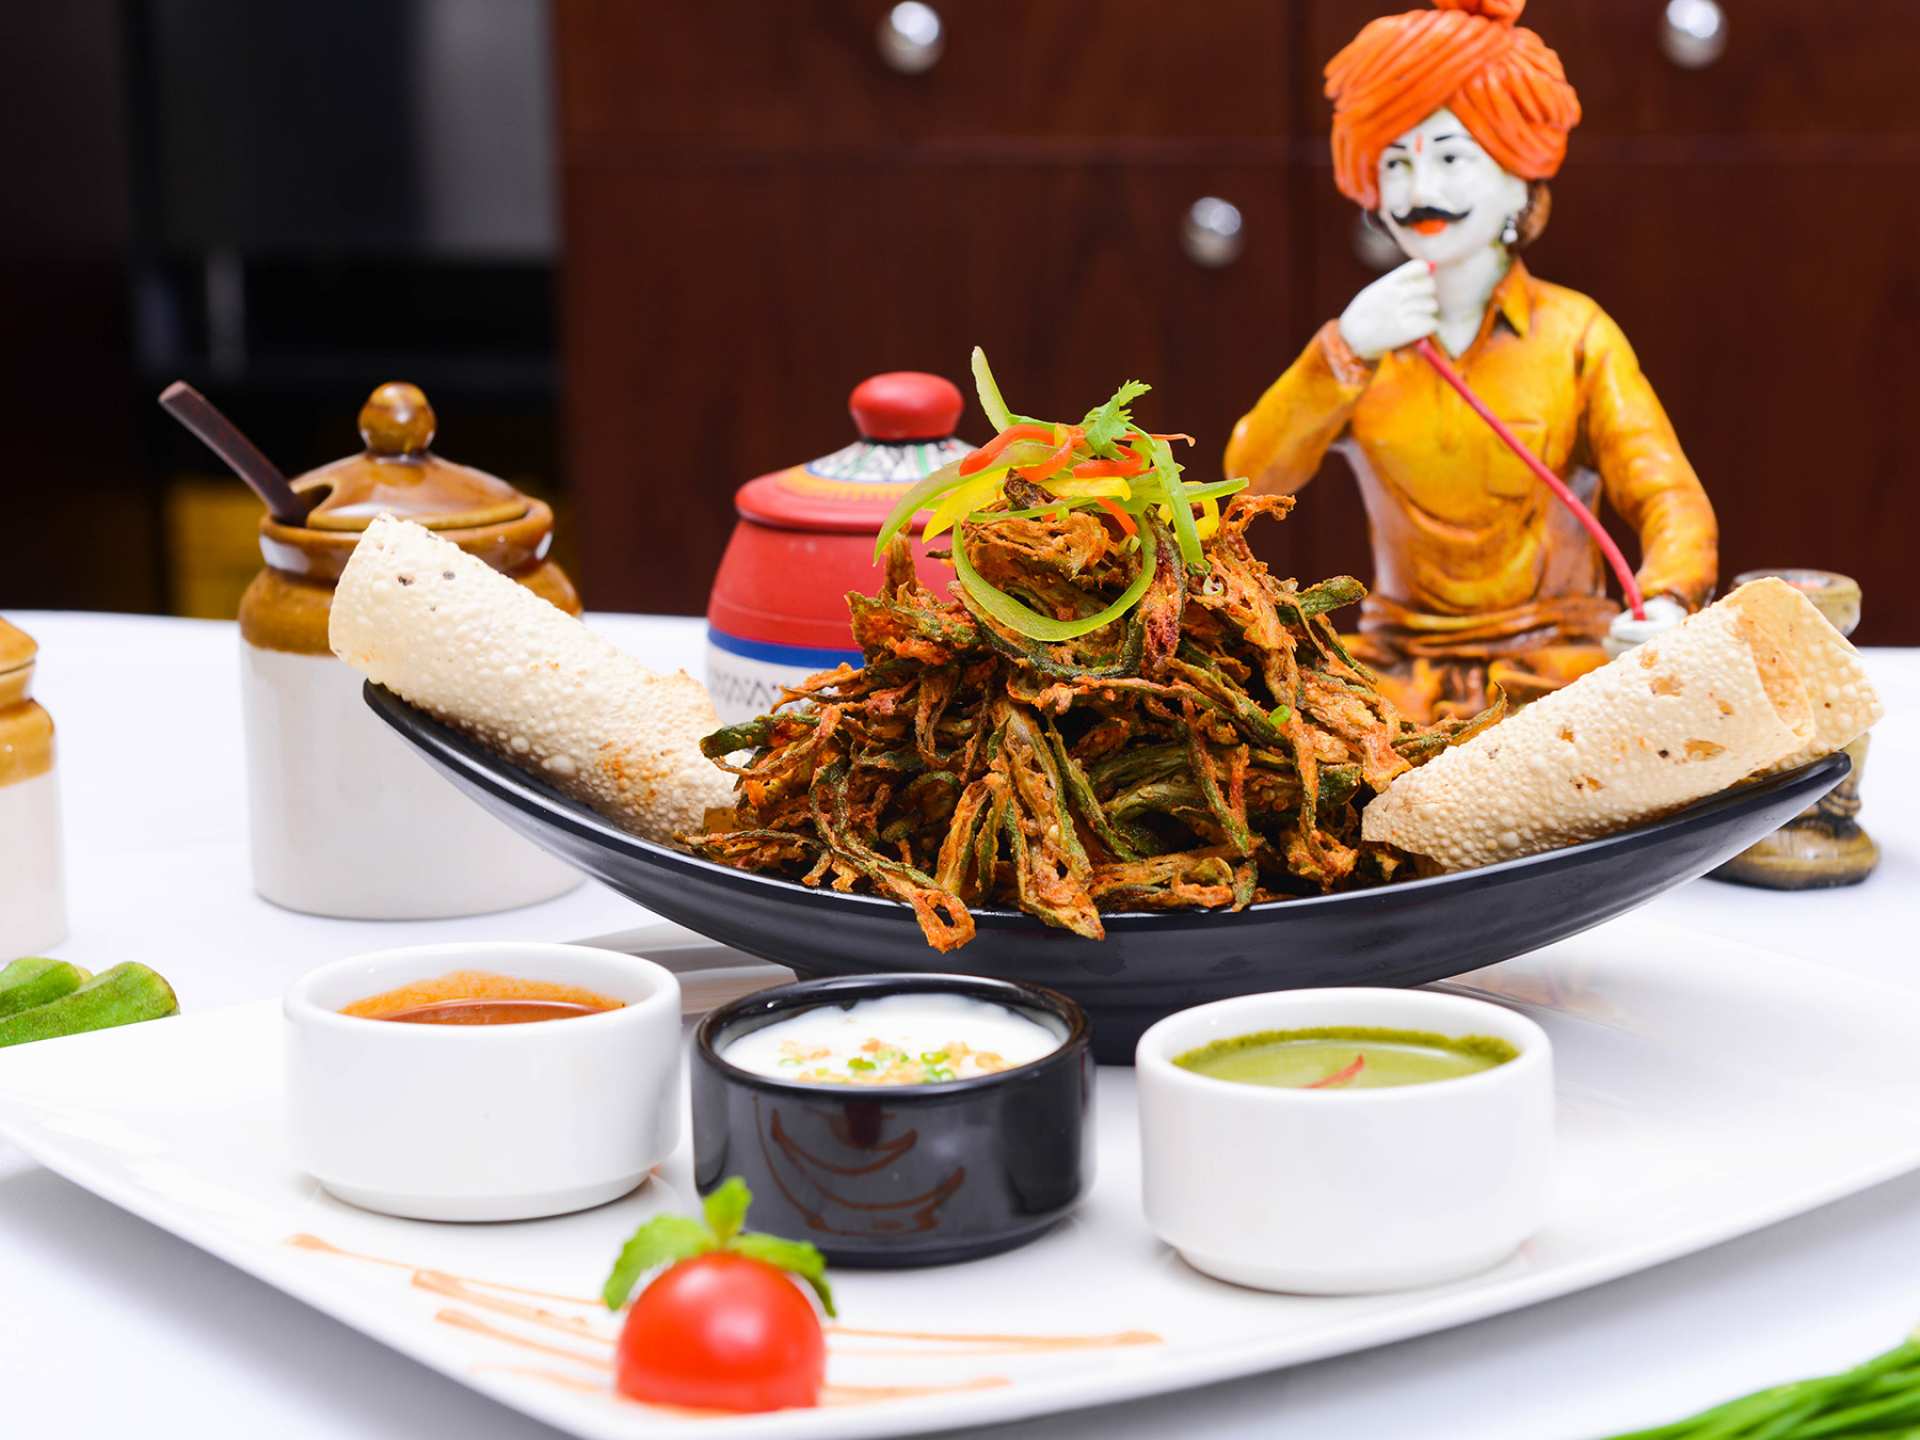 Khau Gully vegan menu | Fried okra stacked on a plate with a figurine in the background